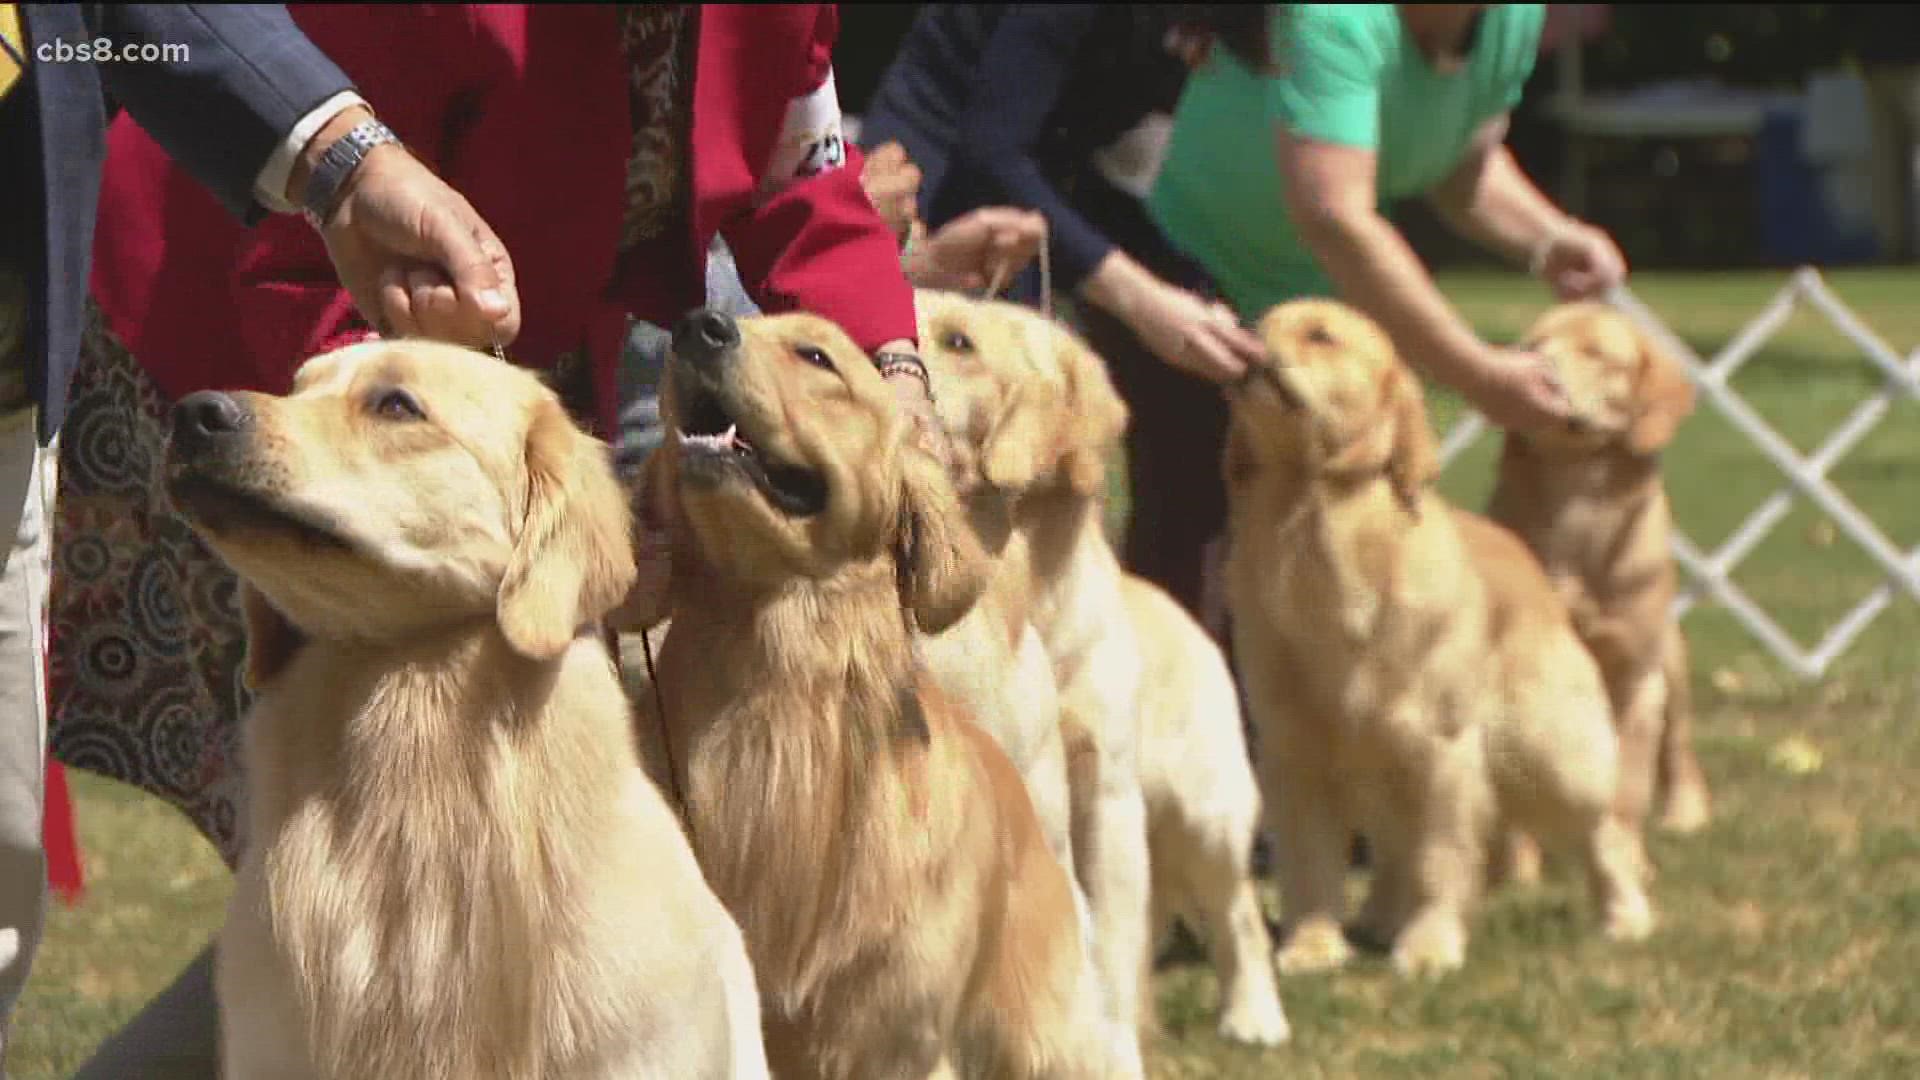 The Del Sur Kennel Club is encouraging animal lovers to donate to Ukraine relief.